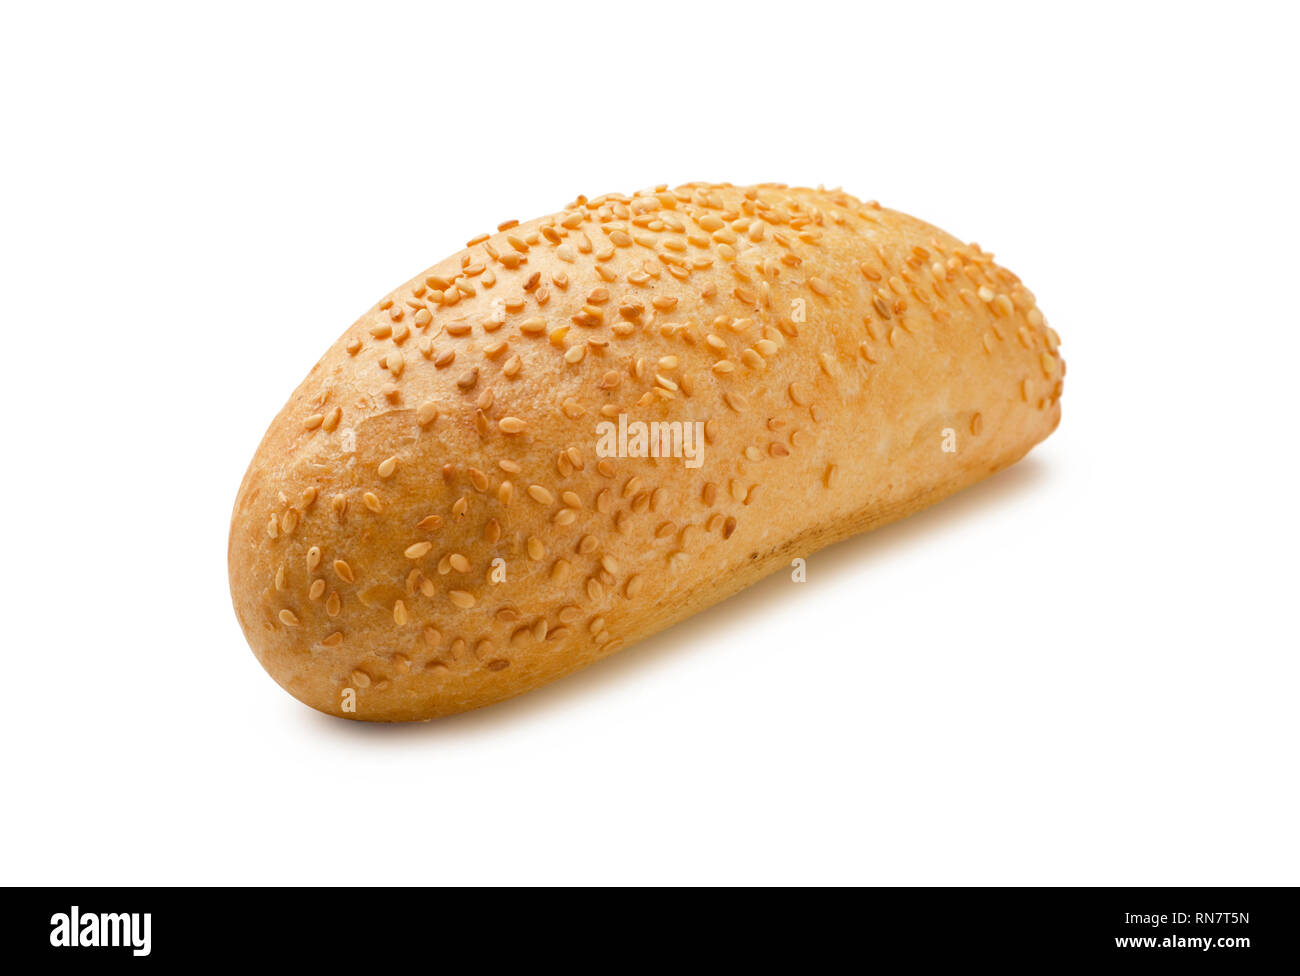 Hot dog bun with sesame seeds isolated on white background Stock Photo